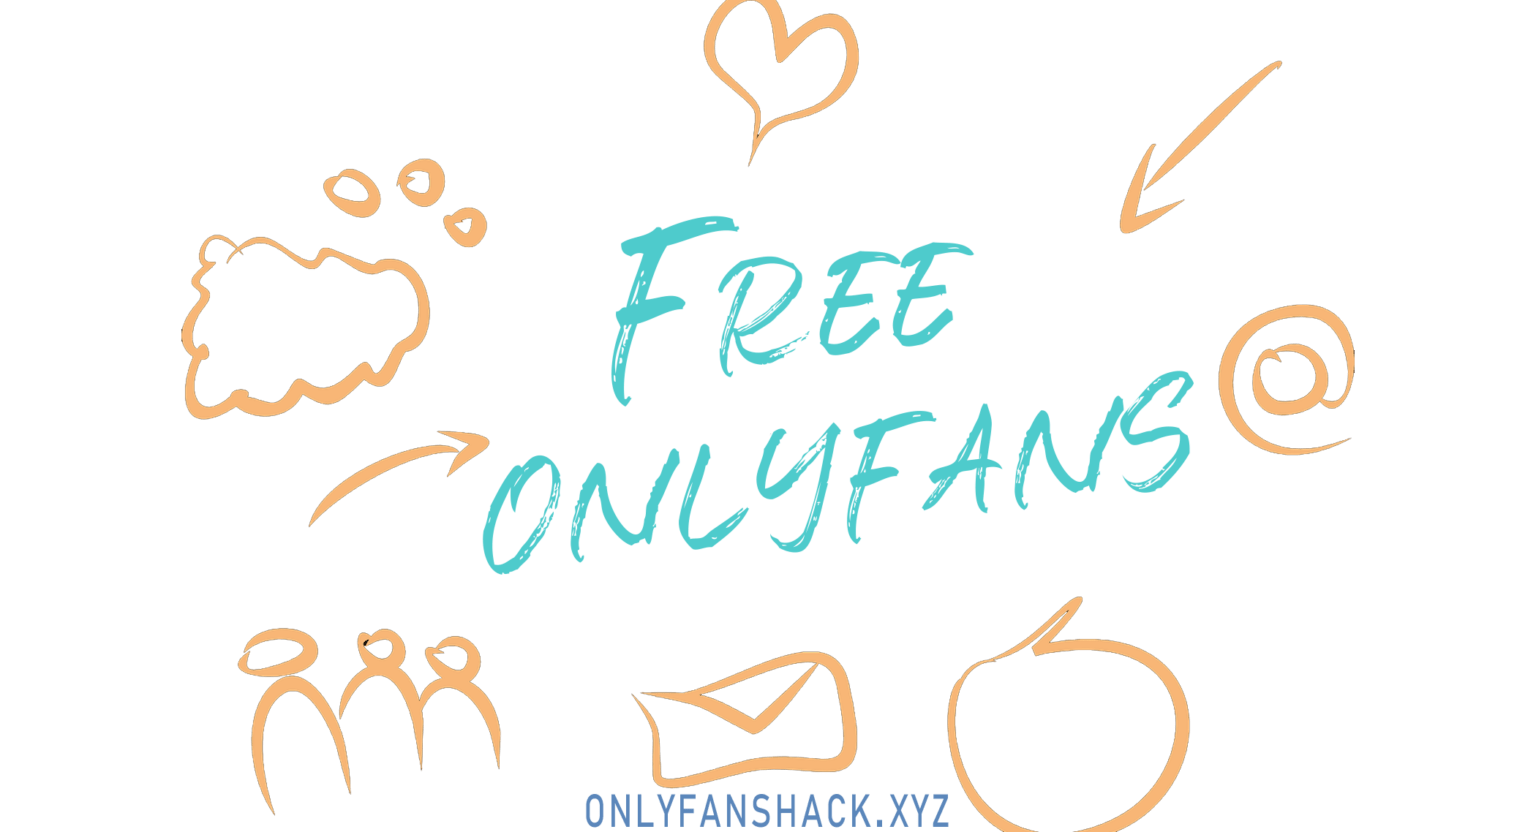 Onlyfans account free 2021